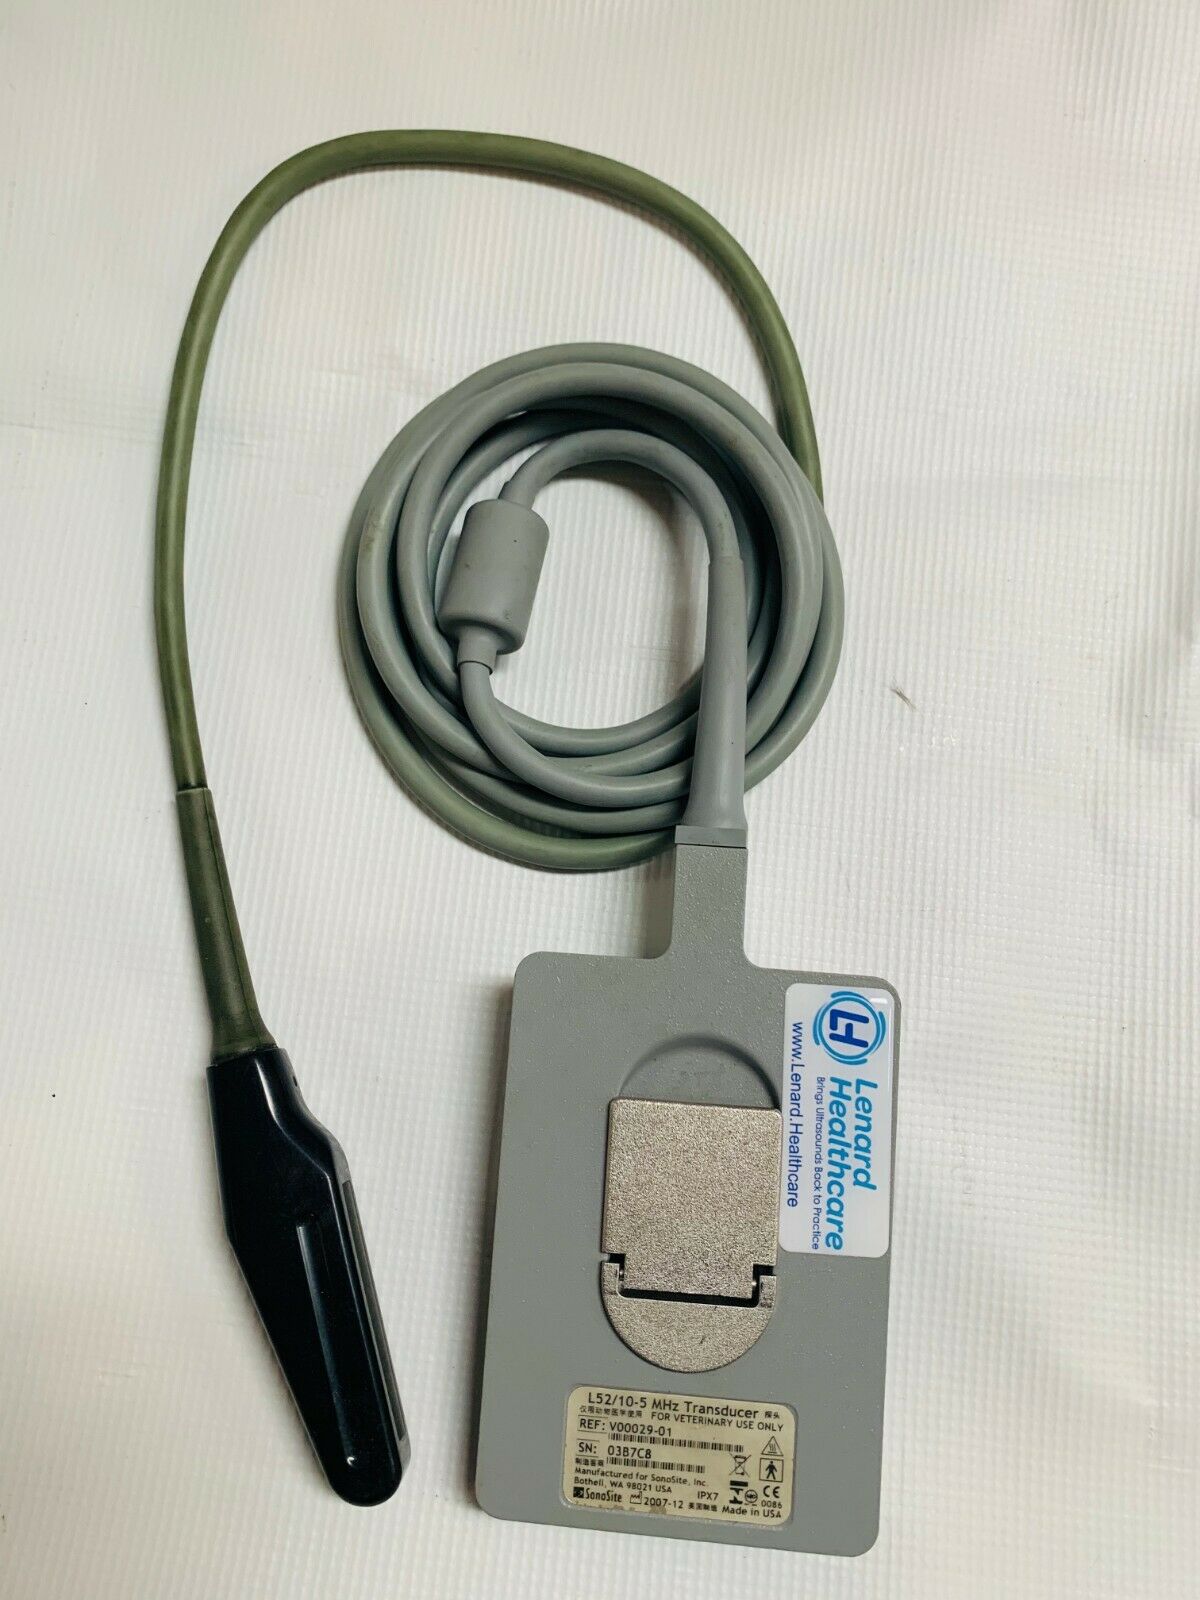 Veterinary Rectal Linear probe L52 For Sonosite portable ultrasounds 2007 DIAGNOSTIC ULTRASOUND MACHINES FOR SALE